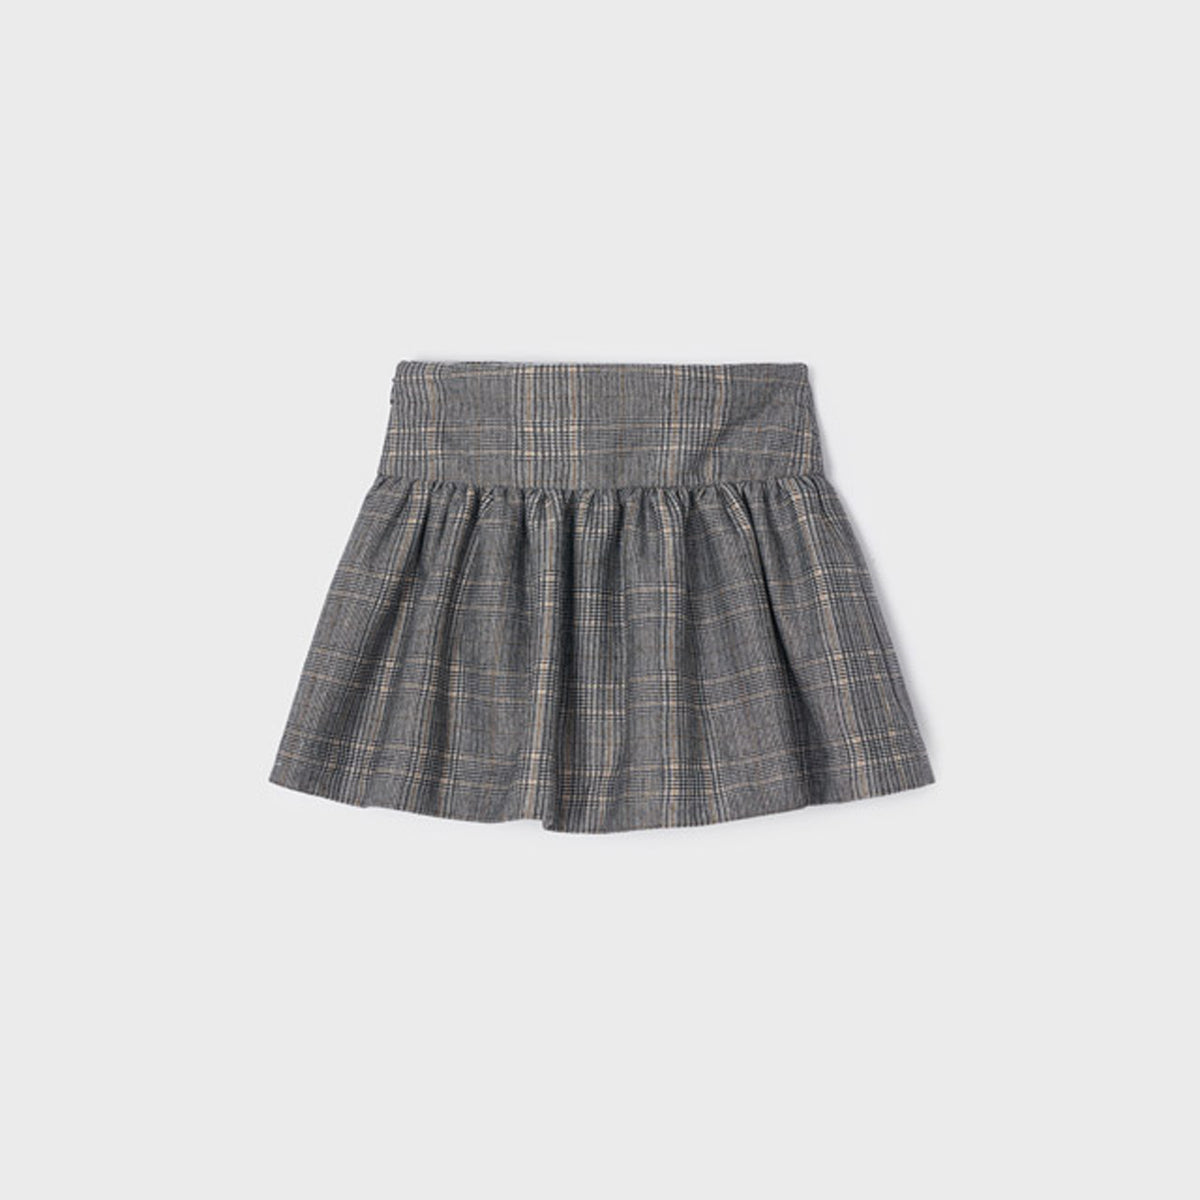 Grey Plaid Skirt With Bow